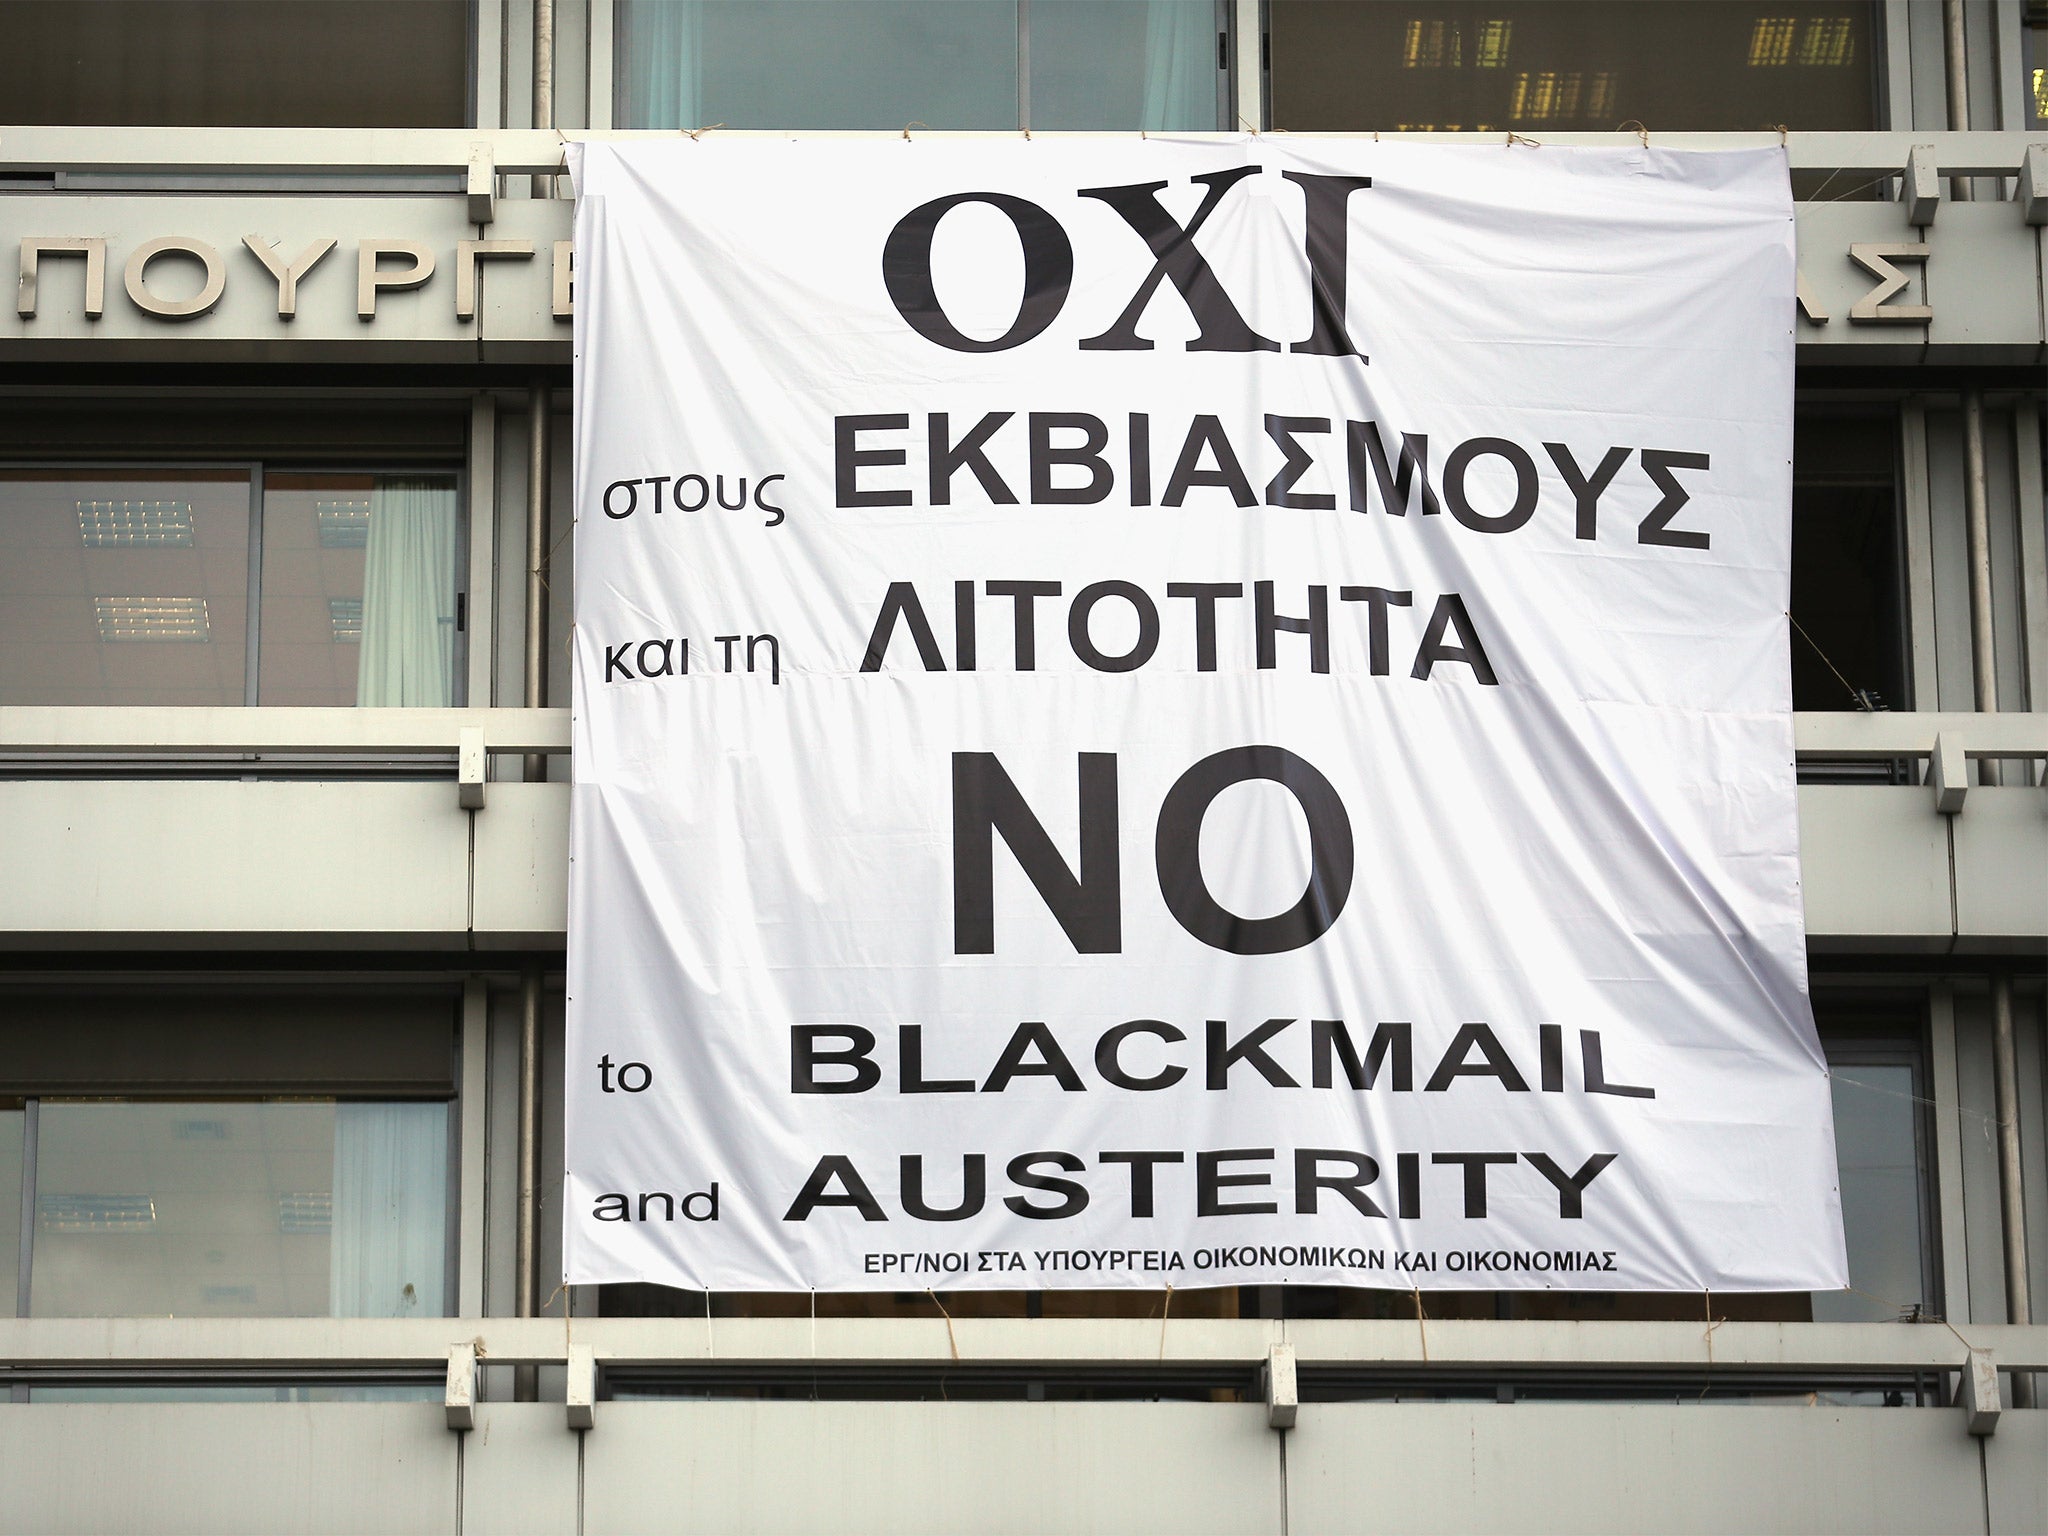 A banner supporting the NO vote in the upcoming referendum hangs from the offices of the Greek Finance Ministry